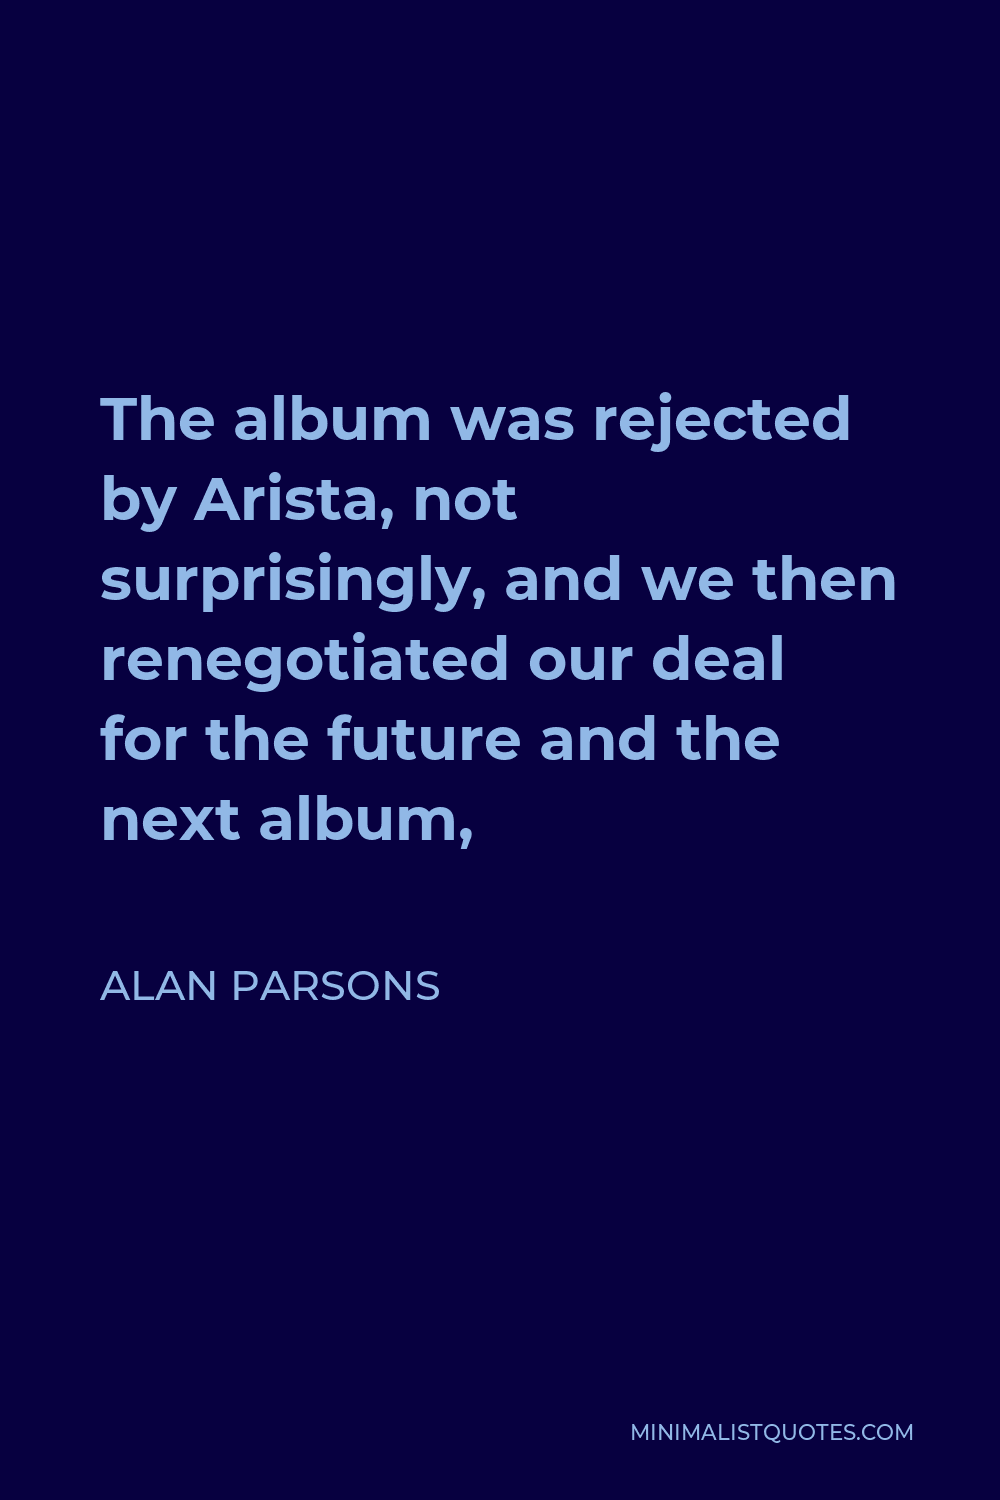 Alan Parsons Quote - The album was rejected by Arista, not surprisingly, and we then renegotiated our deal for the future and the next album,